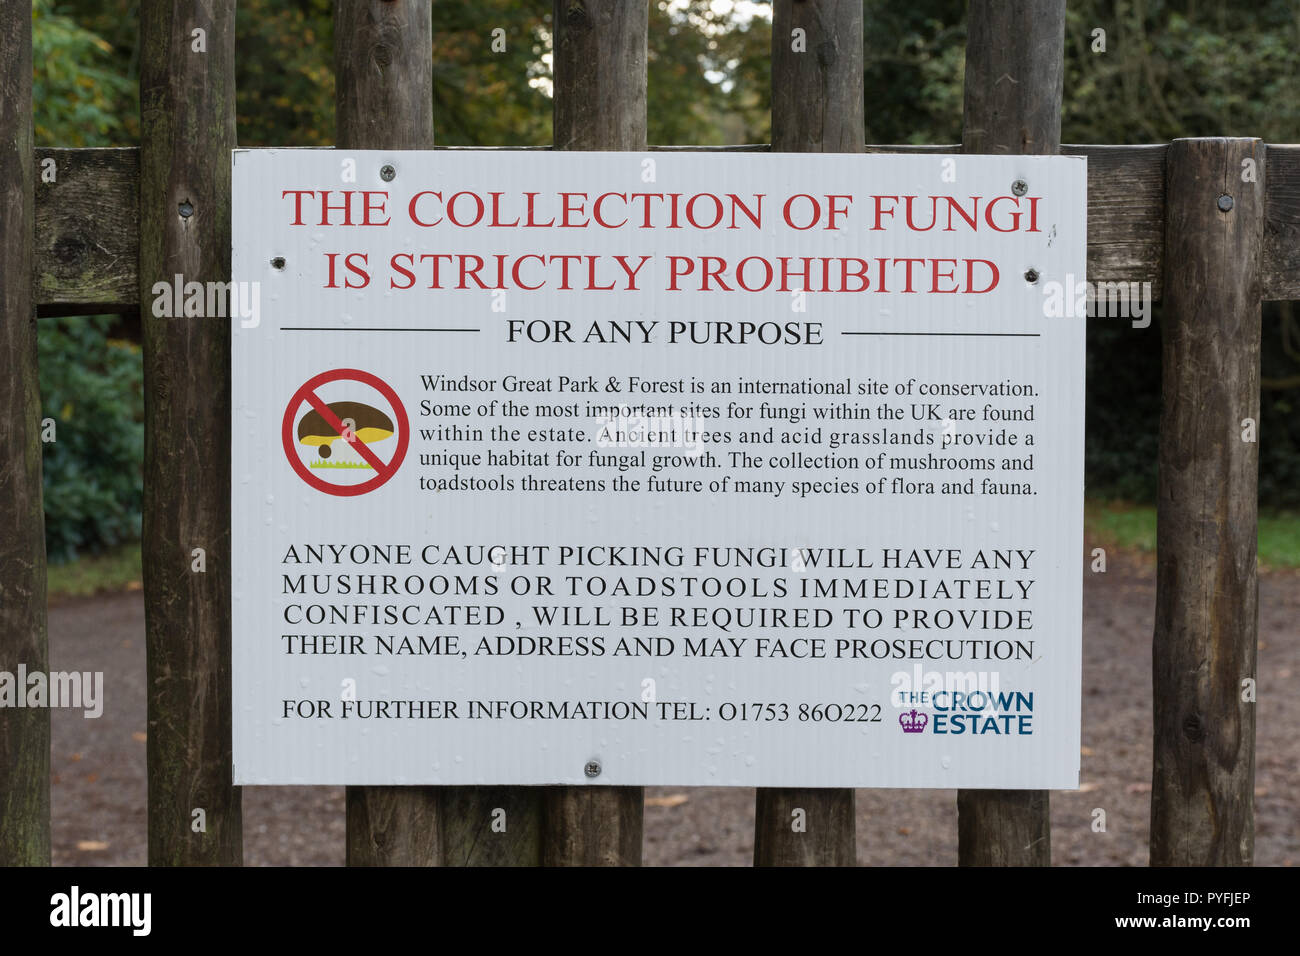 Sign on gate reading The collection of fungi is strictly prohibited - at entrance to Virginia Water Royal Park Crown Estate land in Surrey, UK Stock Photo